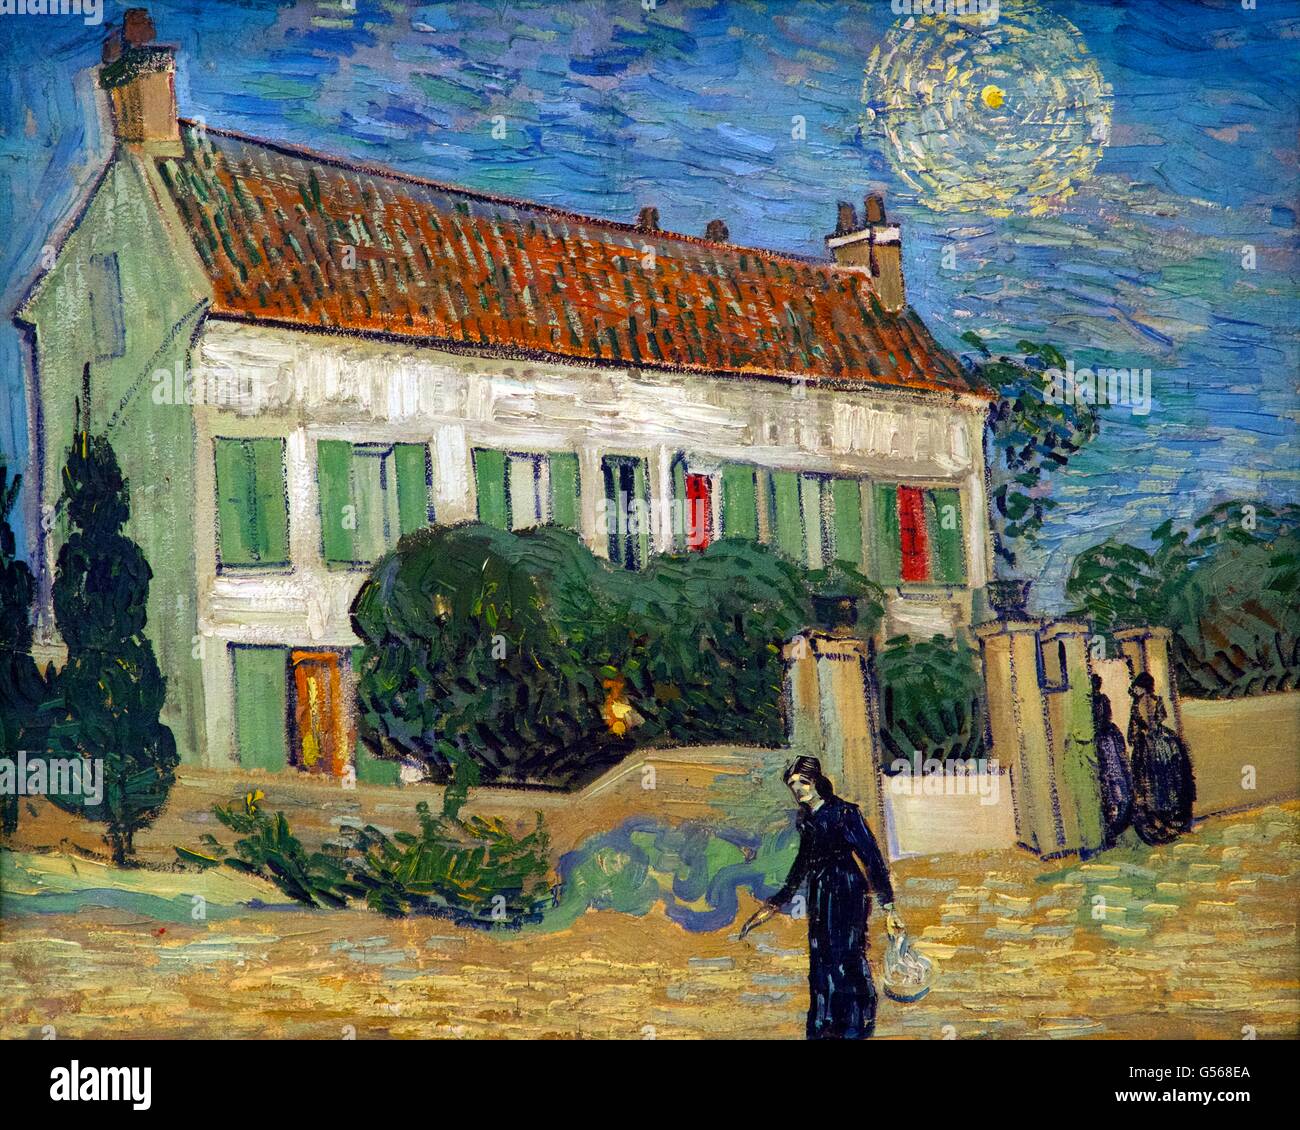 The White House at Night, by Vincent van Gogh, 1890, State Hermitage Museum, Saint Petersburg, Russia Stock Photo